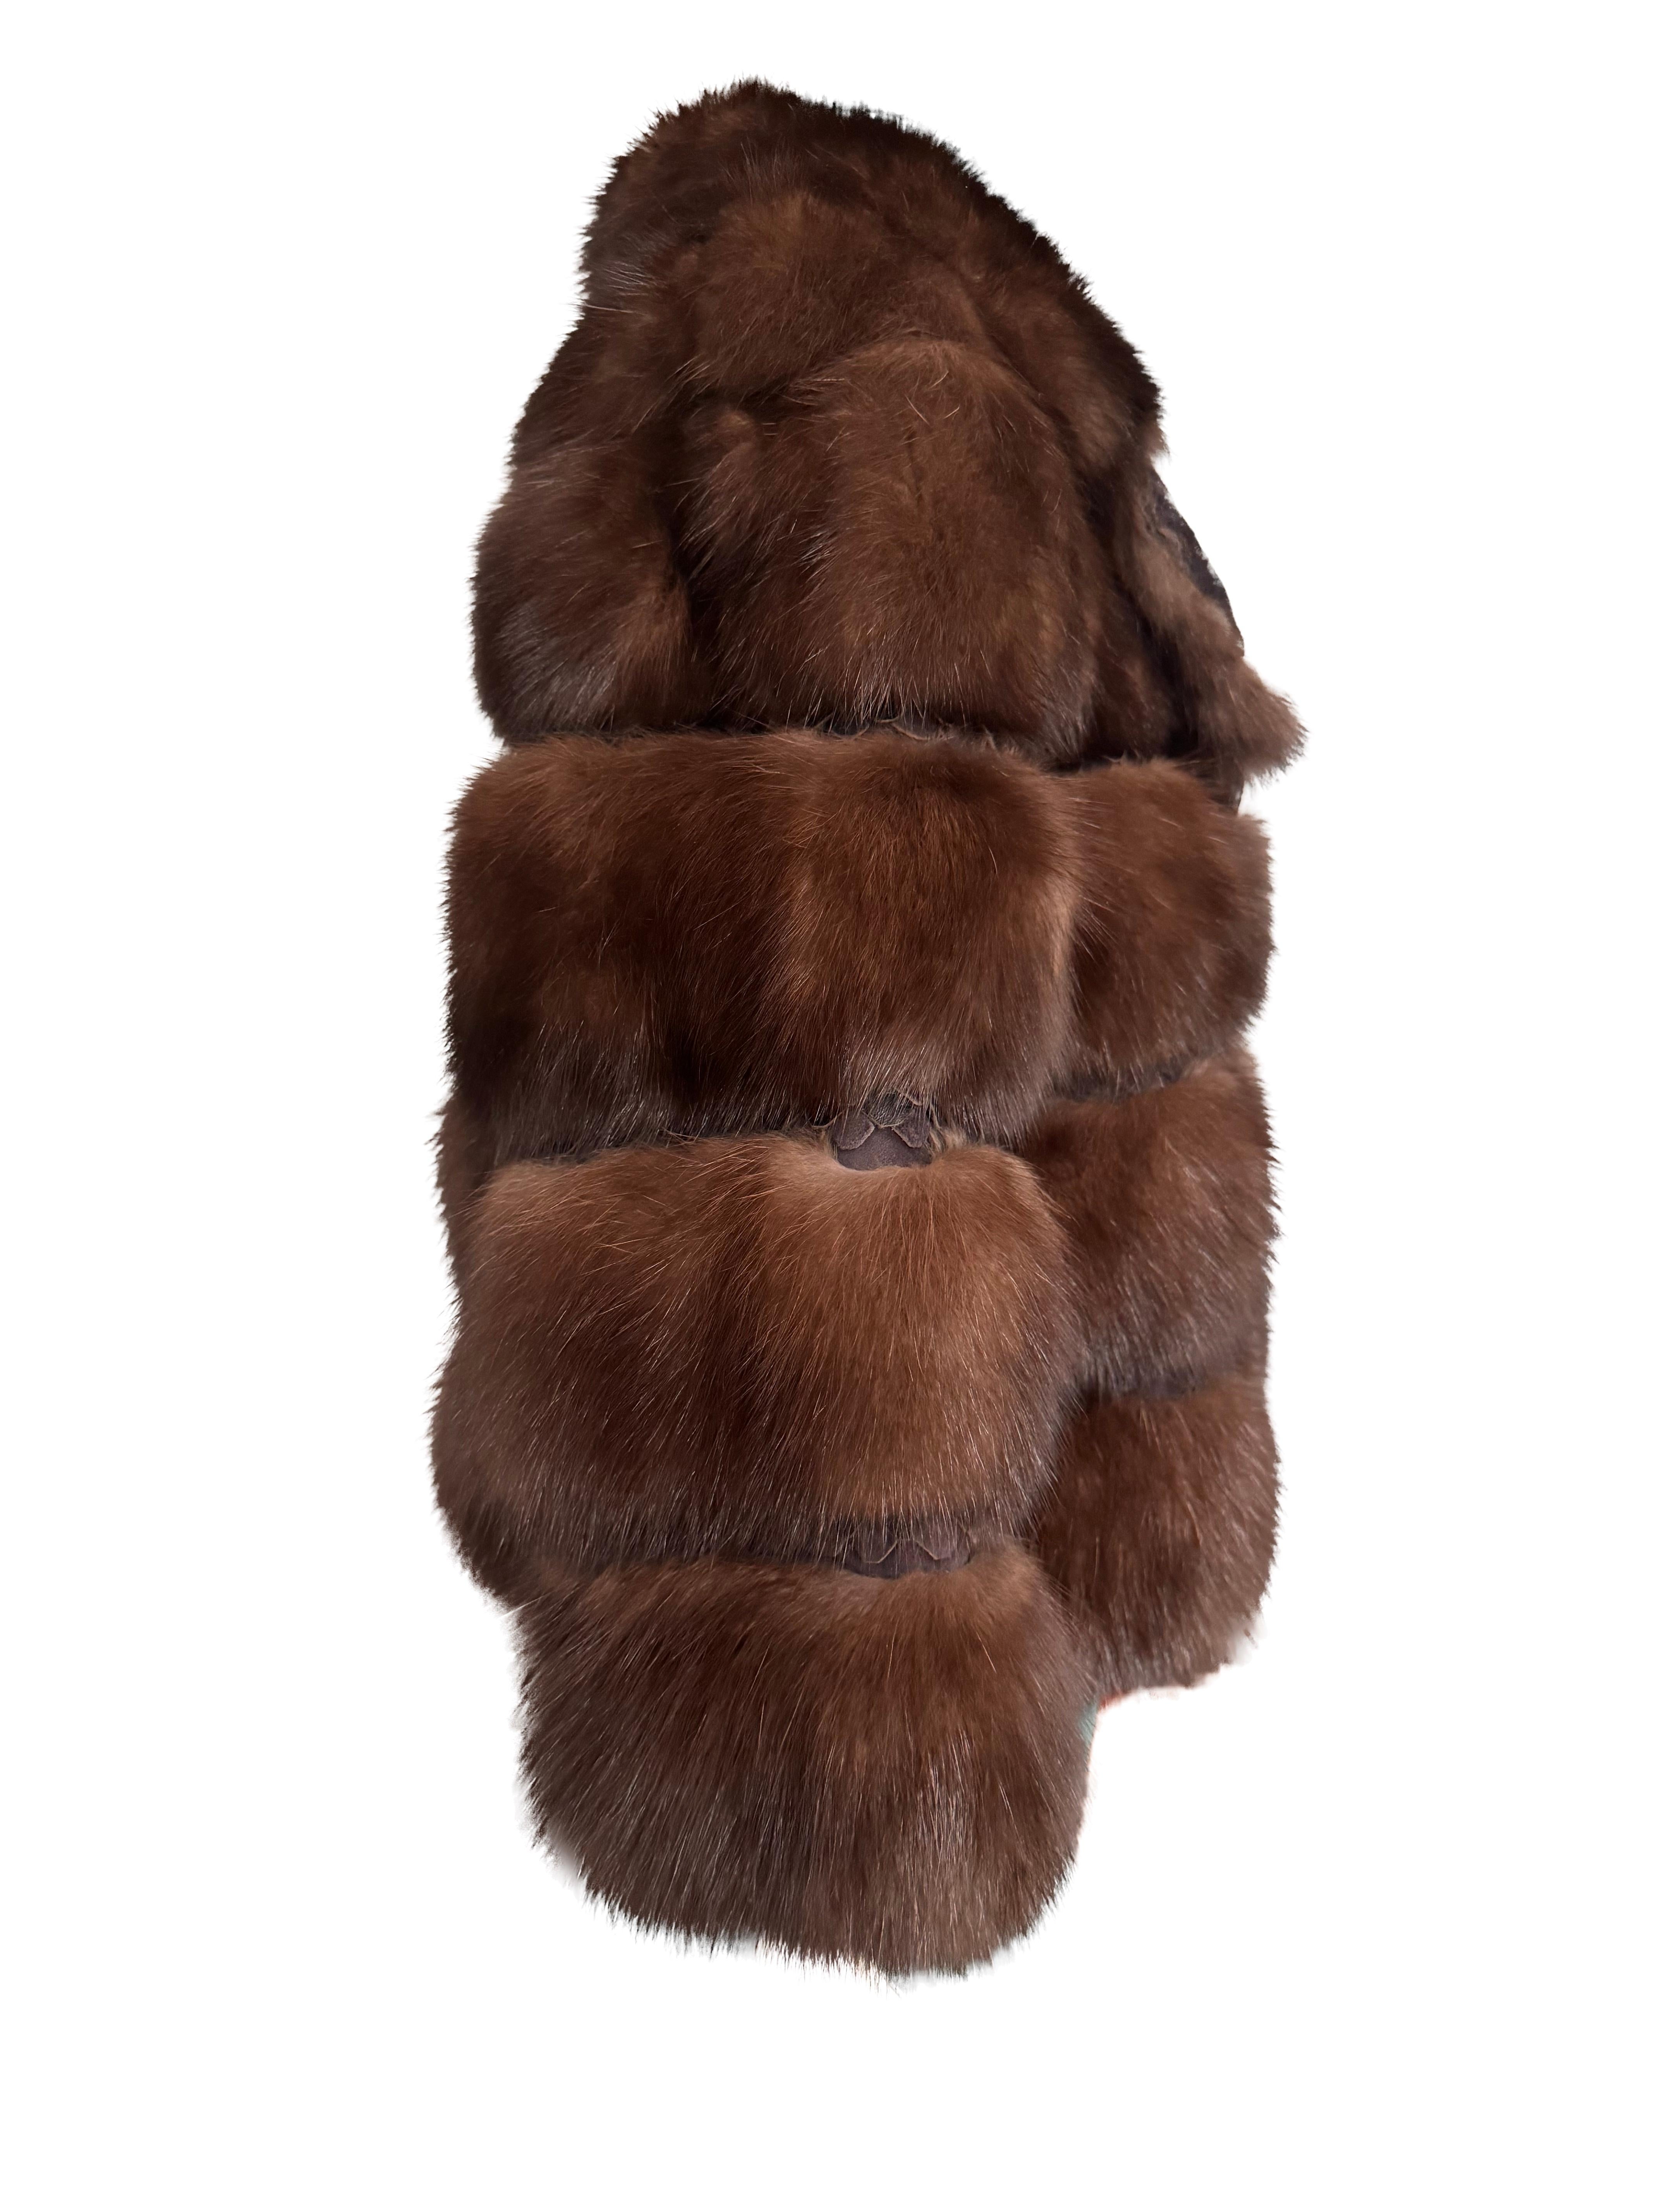 Sable Coat  For Sale 2